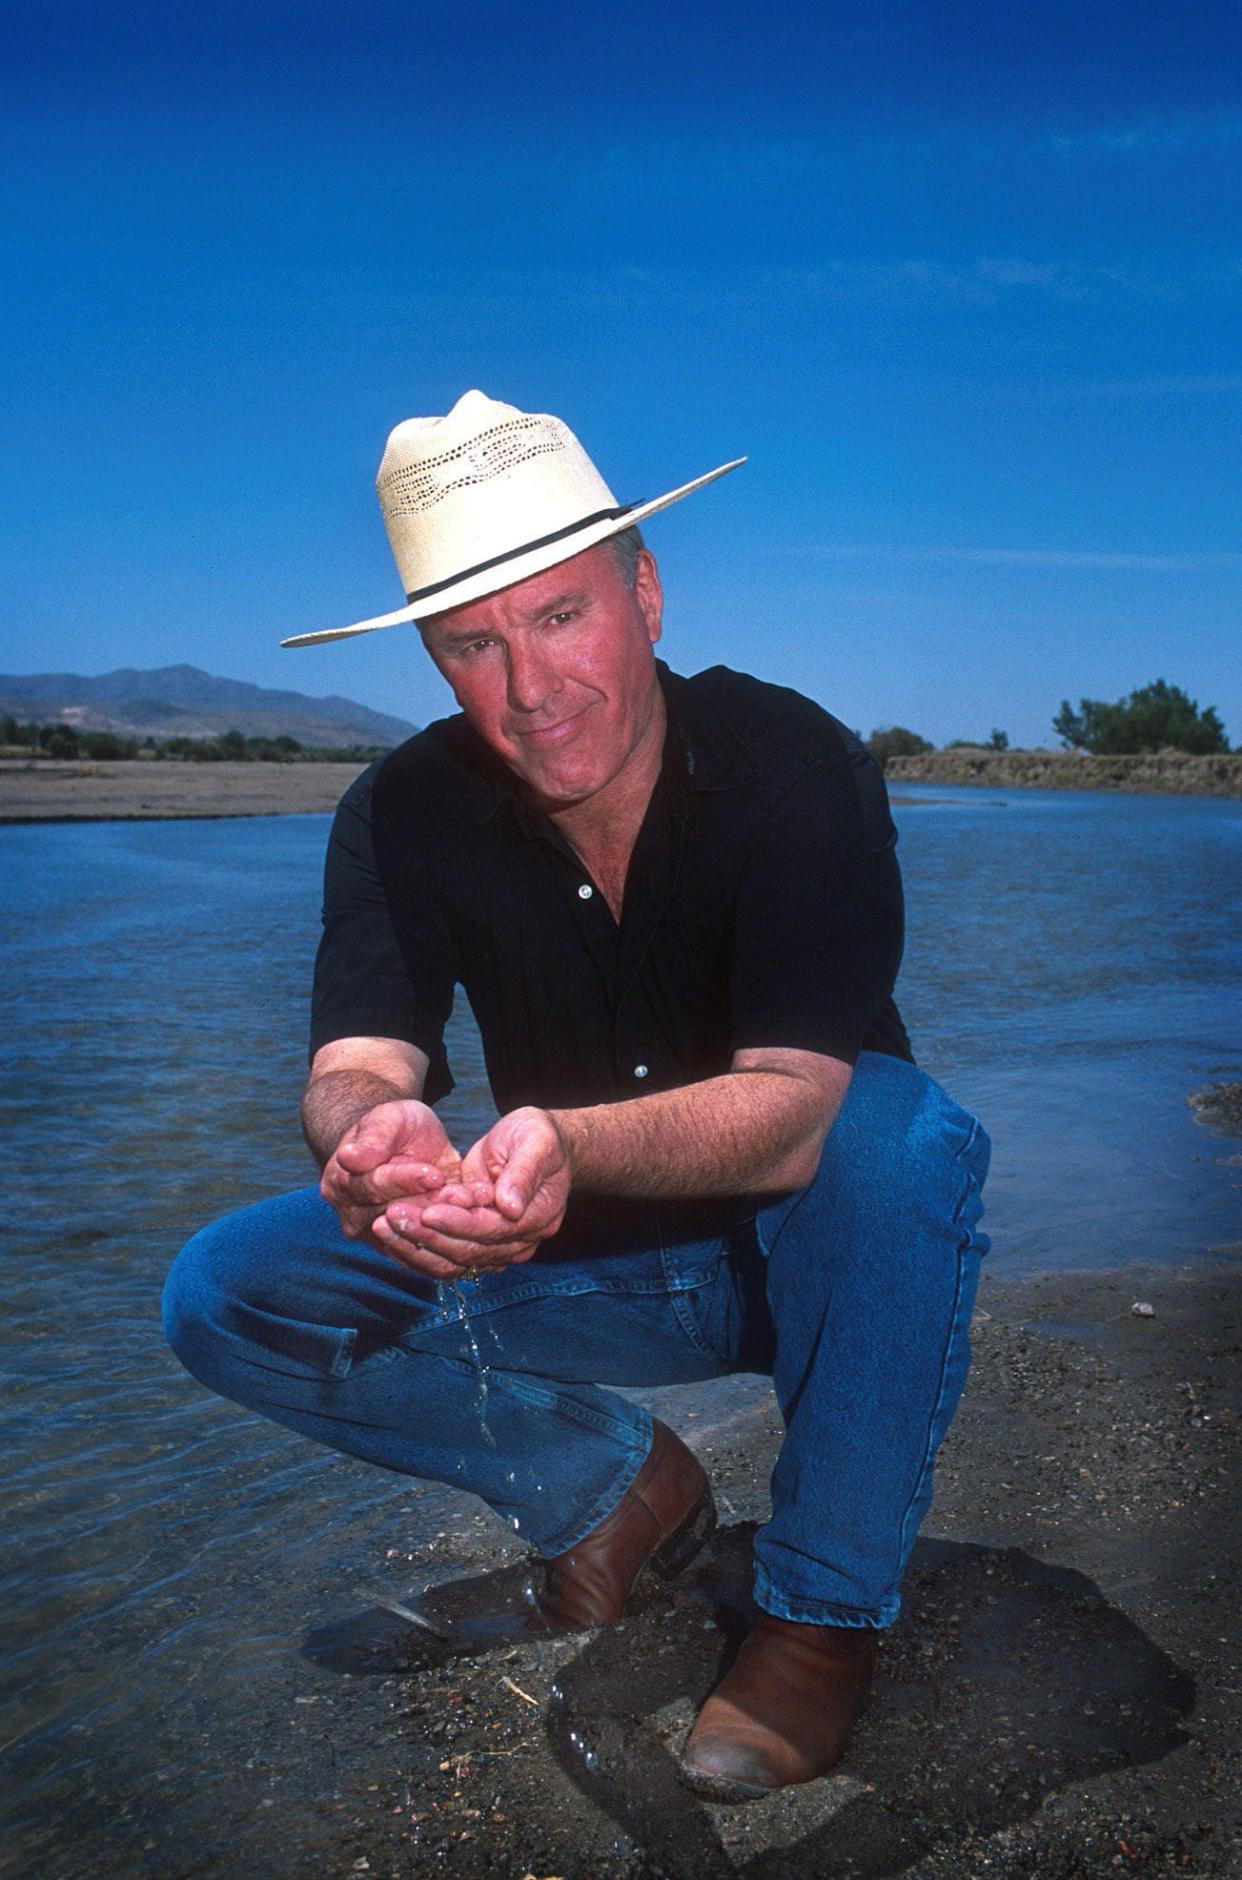 Frank Ward, distinguished achievement professor in New Mexico State University’s College of Agricultural, Consumer and Environmental Sciences, was part of a research team that found that technology adoption as a water-saving method for improving irrigation efficiency is ineffective and can even elevate water scarcity.